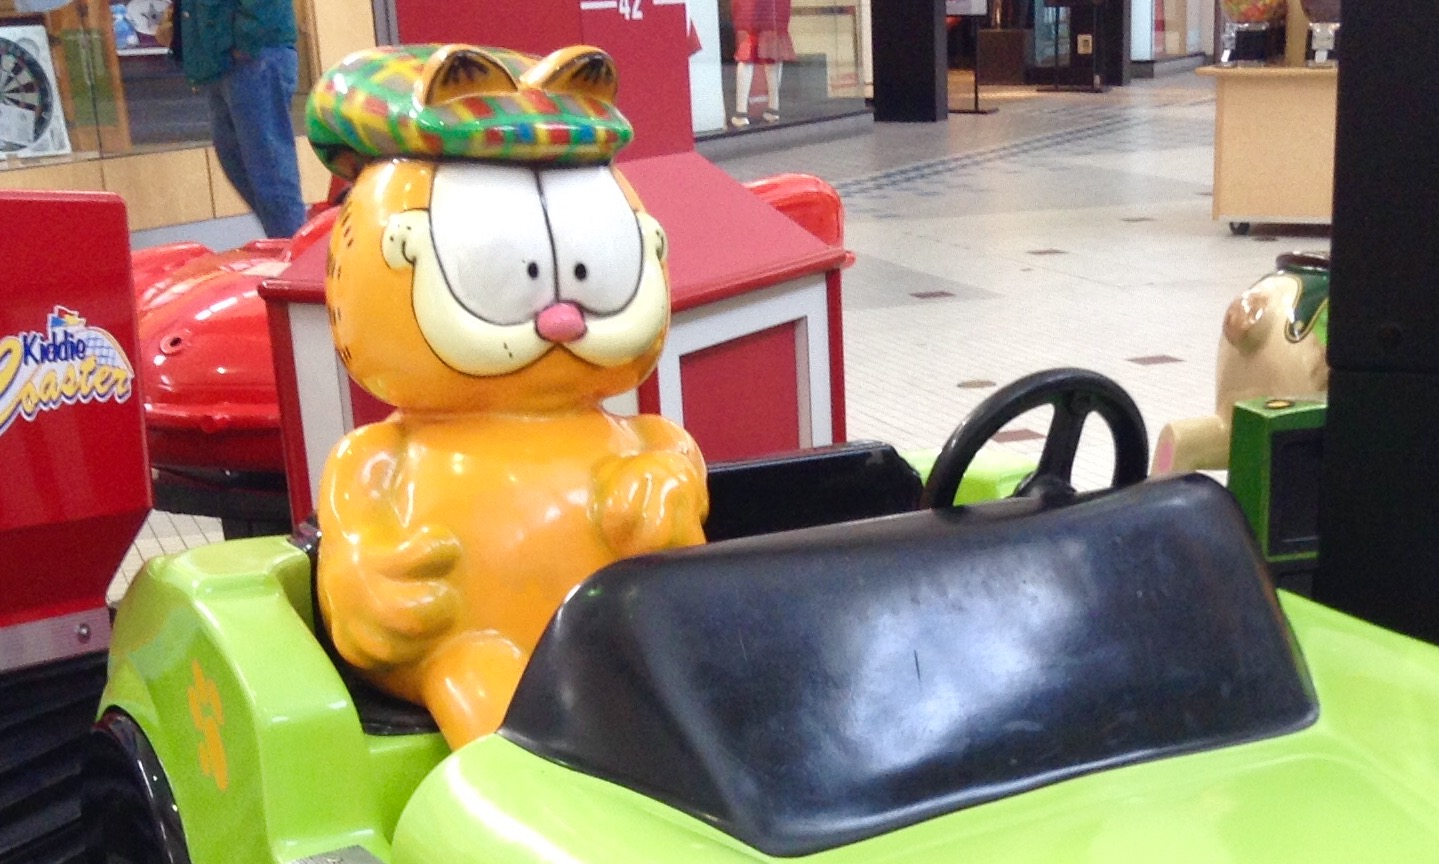 there is a cat in a toy car on display